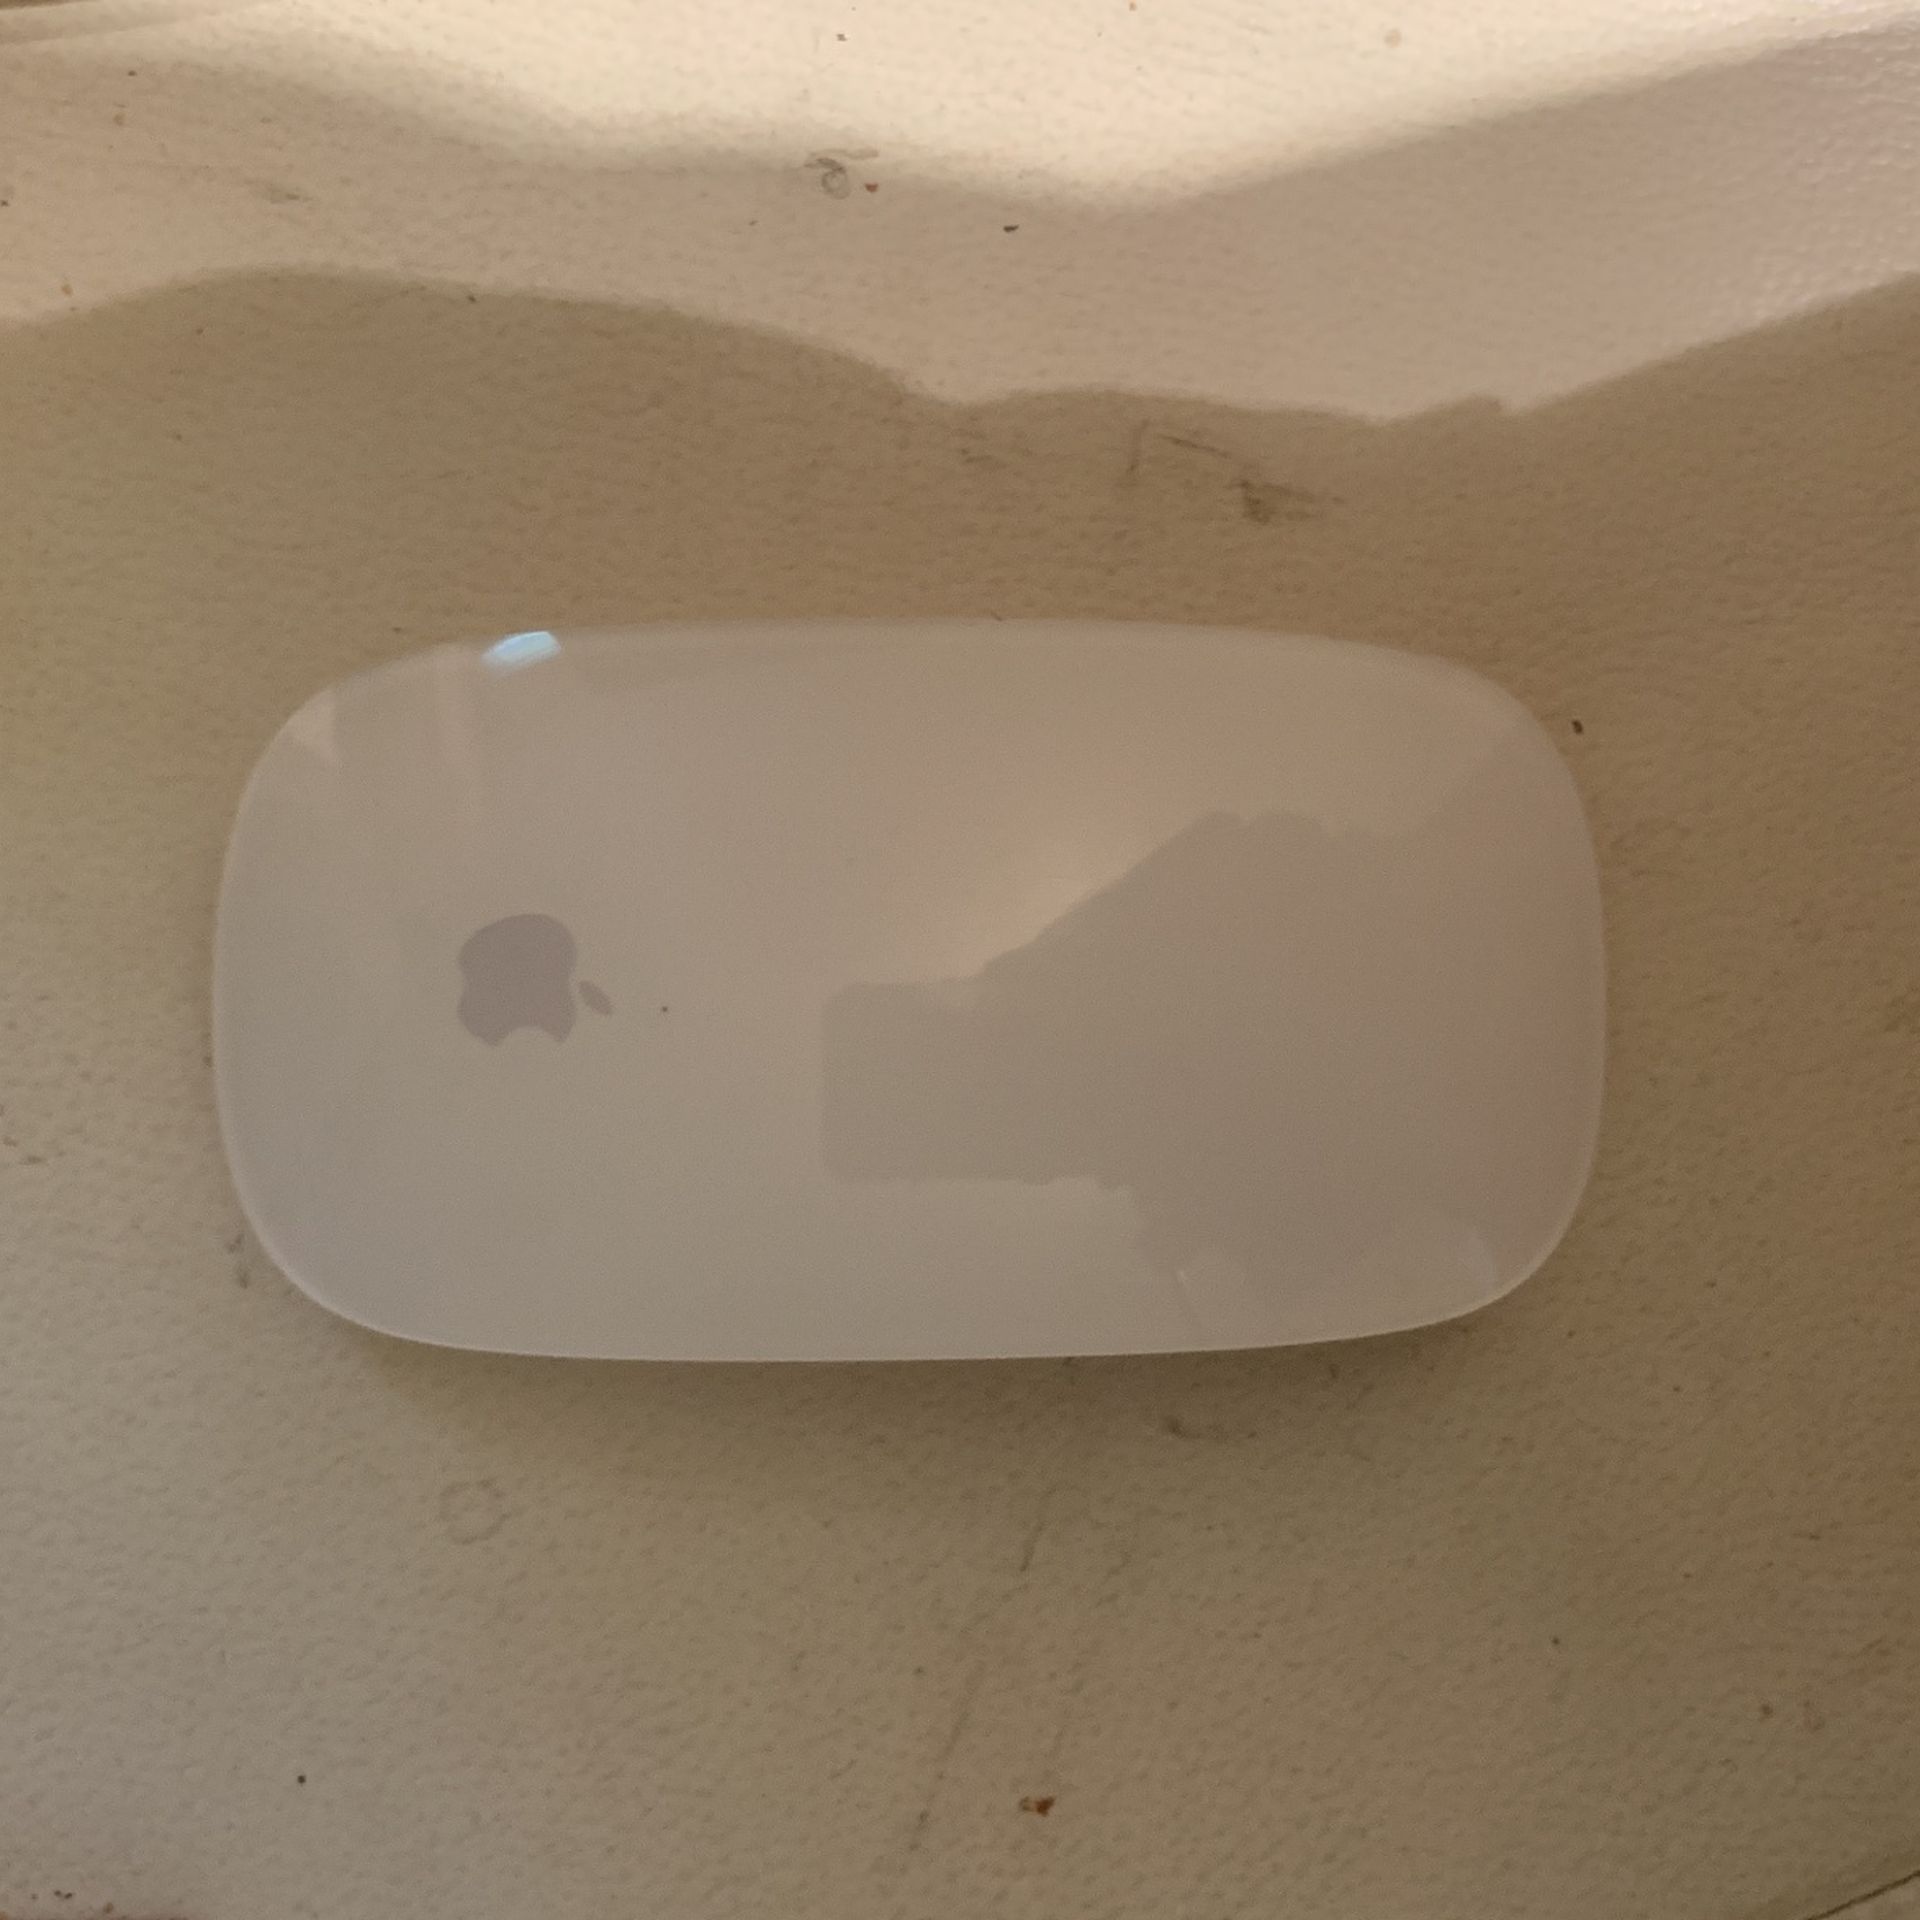 Apple Mouse Wireless